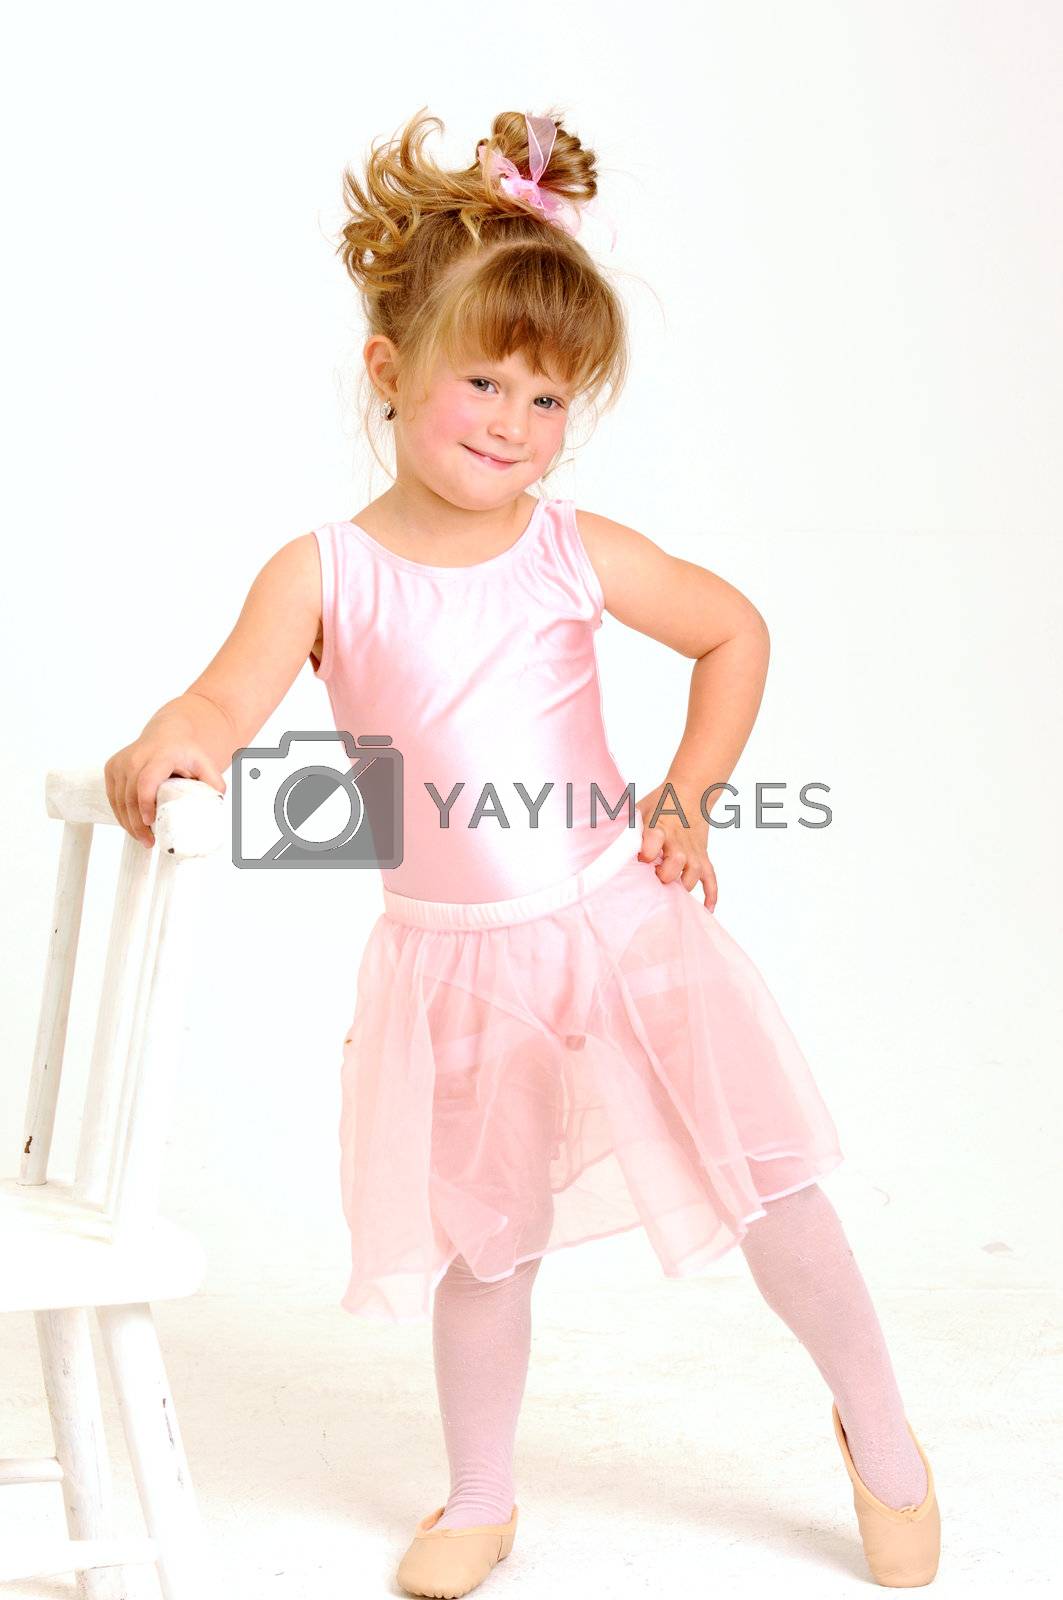 Royalty free image of Little young girl wearing pink ballet dress dancing and smile by Ansunette